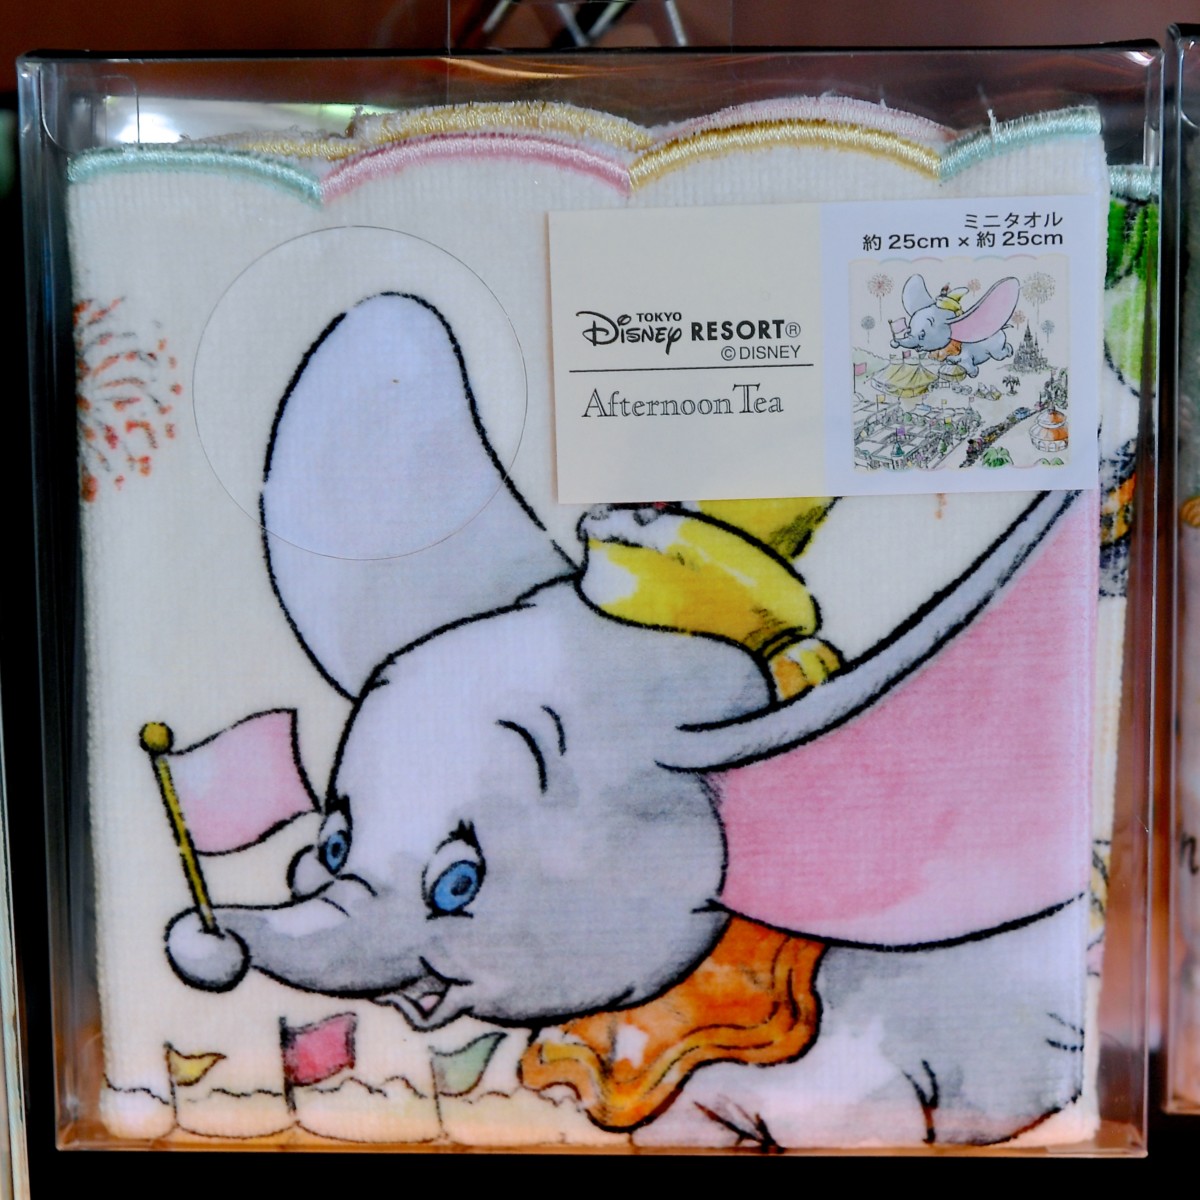 AfternoonTeaプロデュース！東京ディズニーリゾート『ダンボ』グッズ